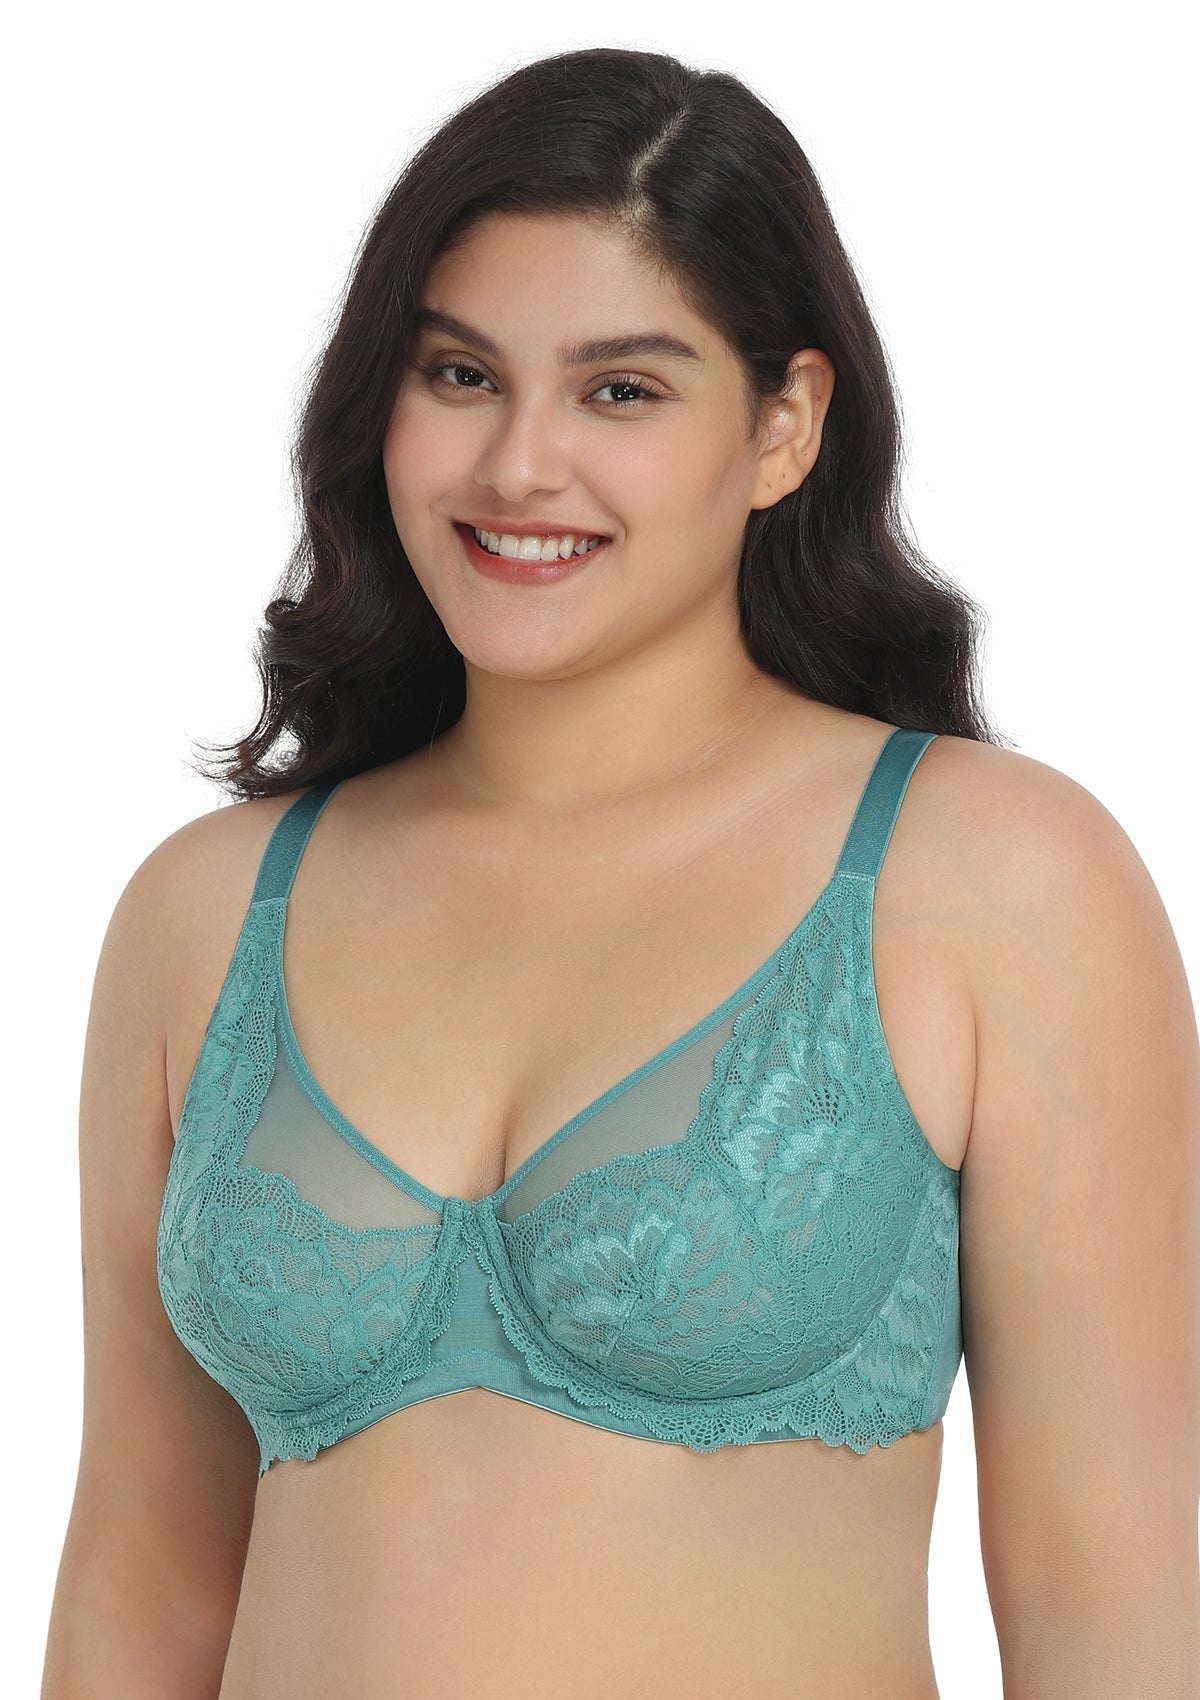 HSIA Paeonia Lace Full Coverage Underwire Non-Padded Uplifting Bra - Dark Blue / 40 / D